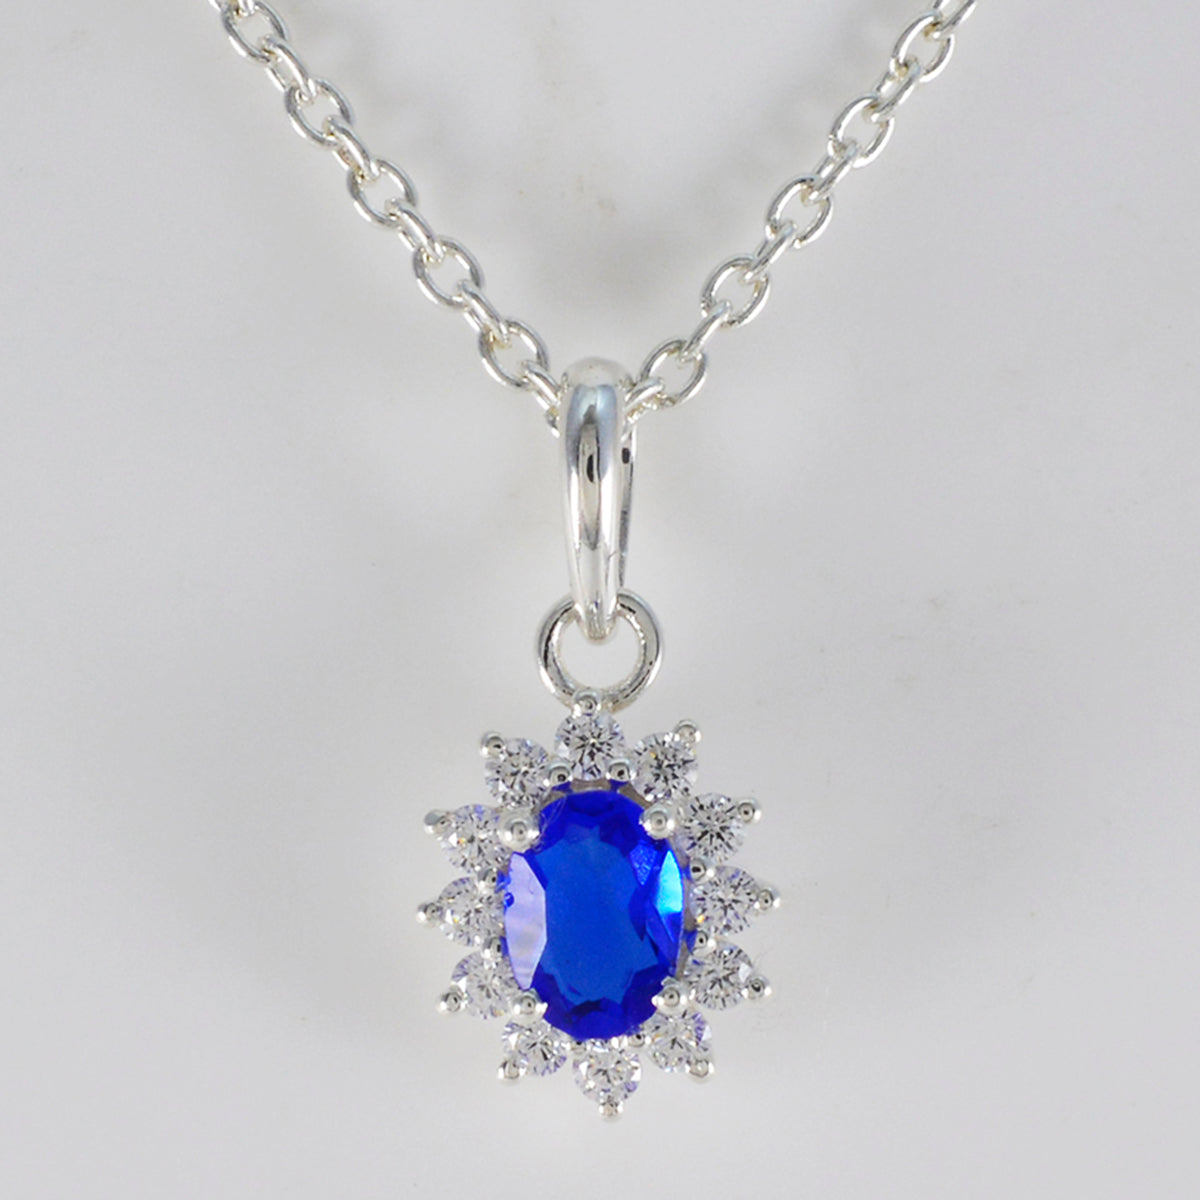 Riyo Attractive Gems Oval Faceted Blue Blue Sapphire Cz Solid Silver Pendant Gift For Anniversary